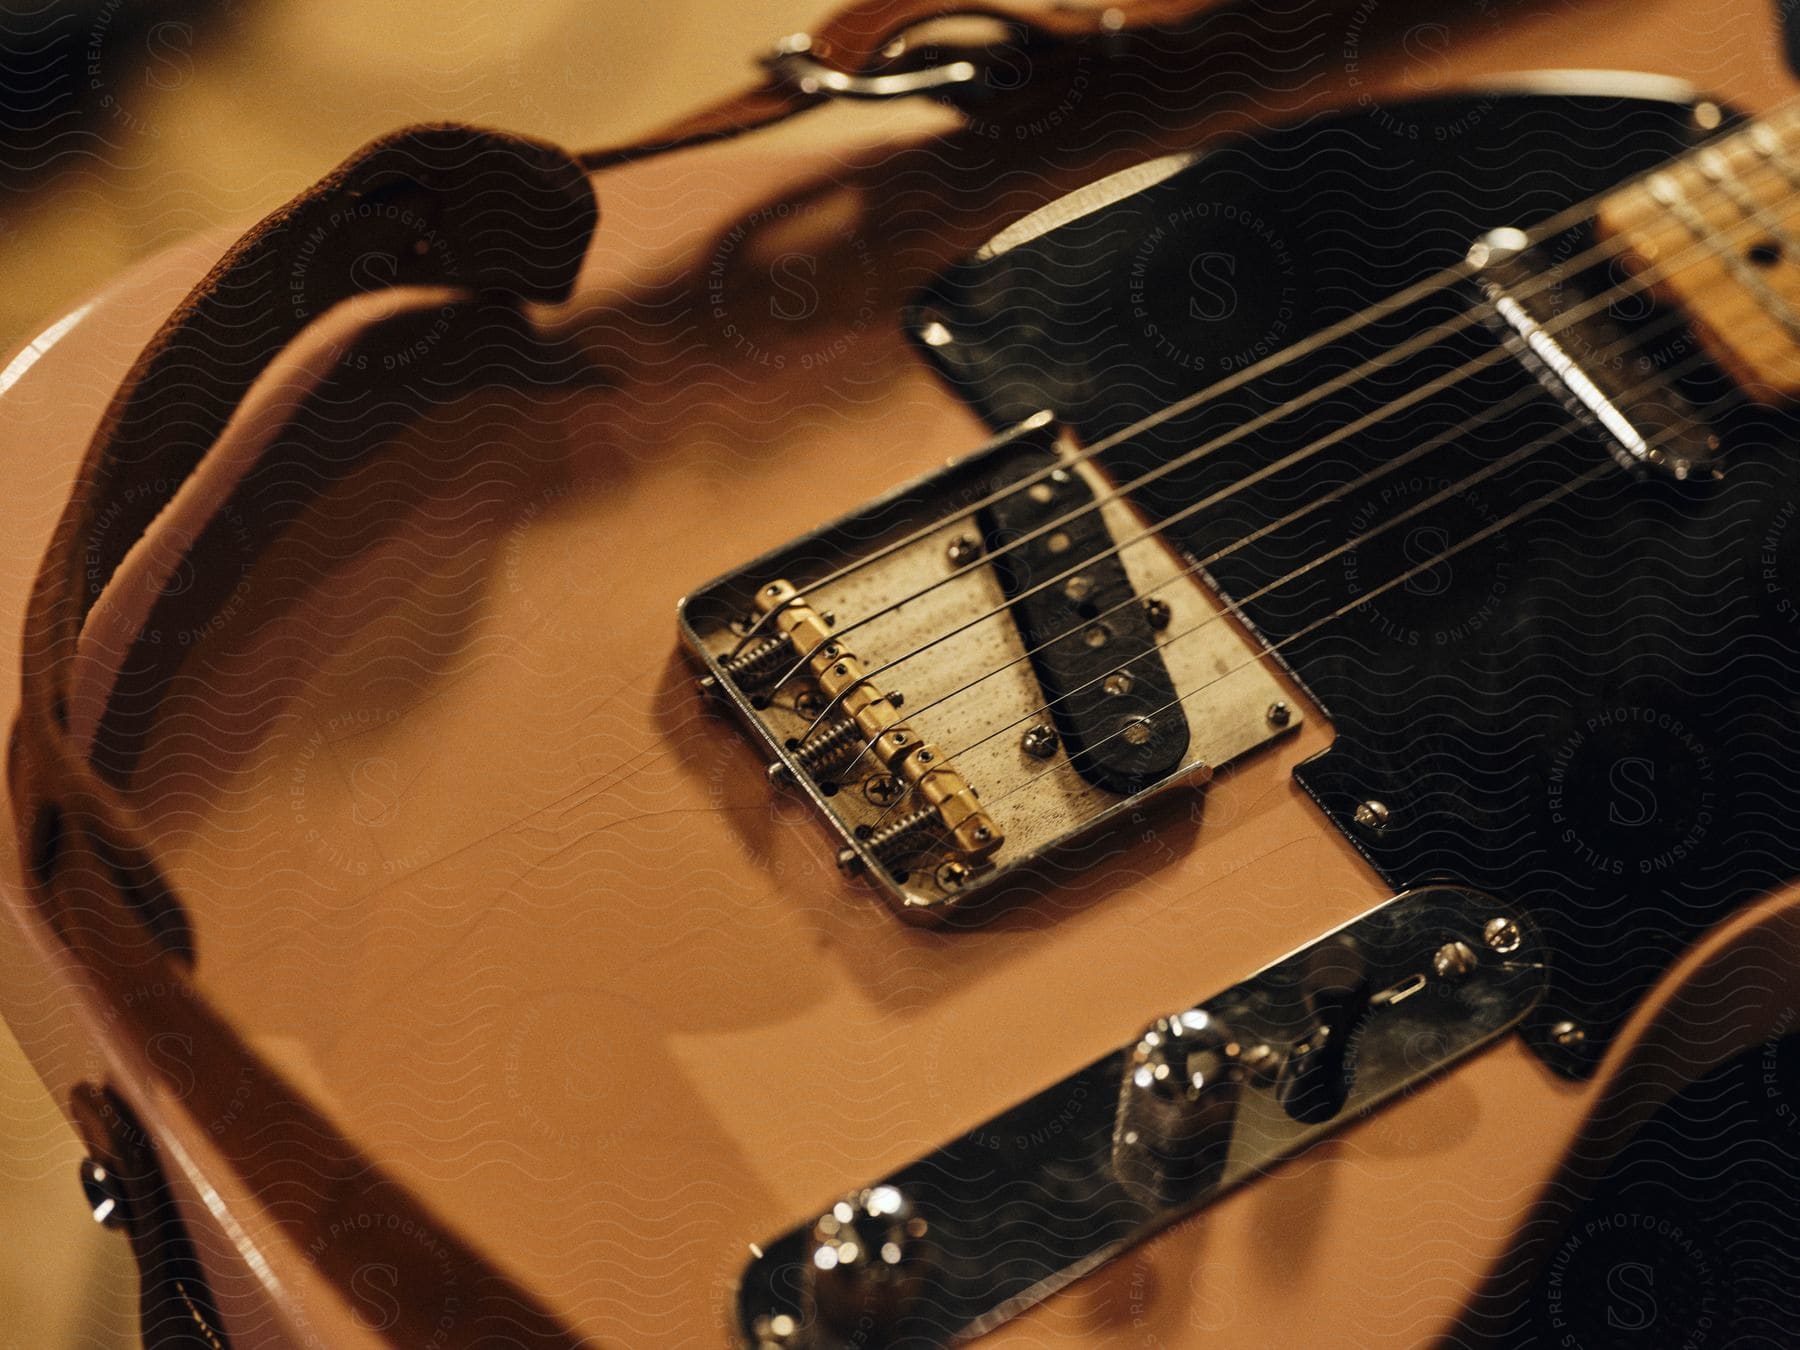 Stock photo of leather shoulder strap rests on pale colored guitar lying on a flat surface.